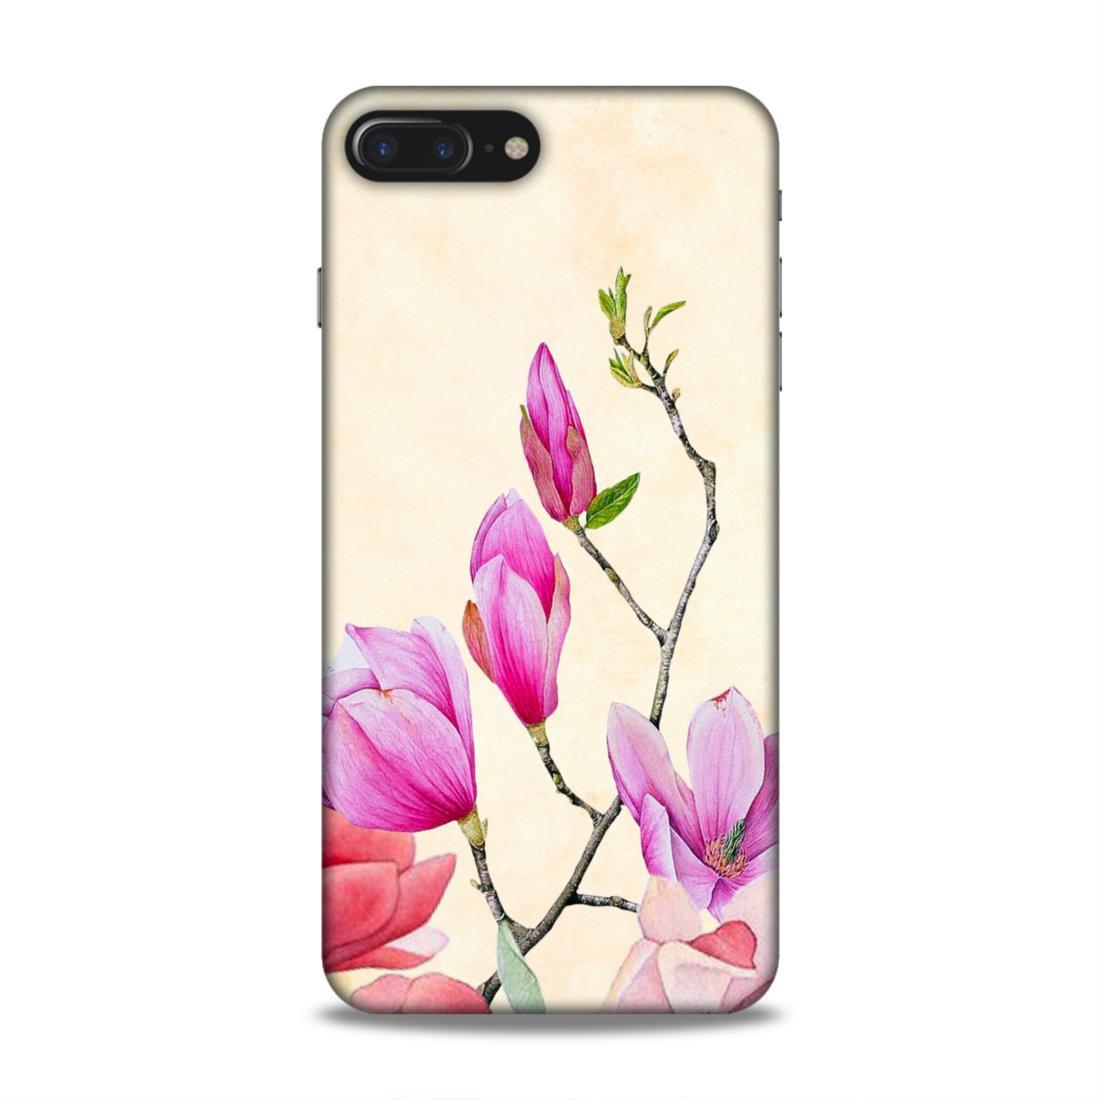 Pink Flower iPhone 7 Plus Mobile Cover Case